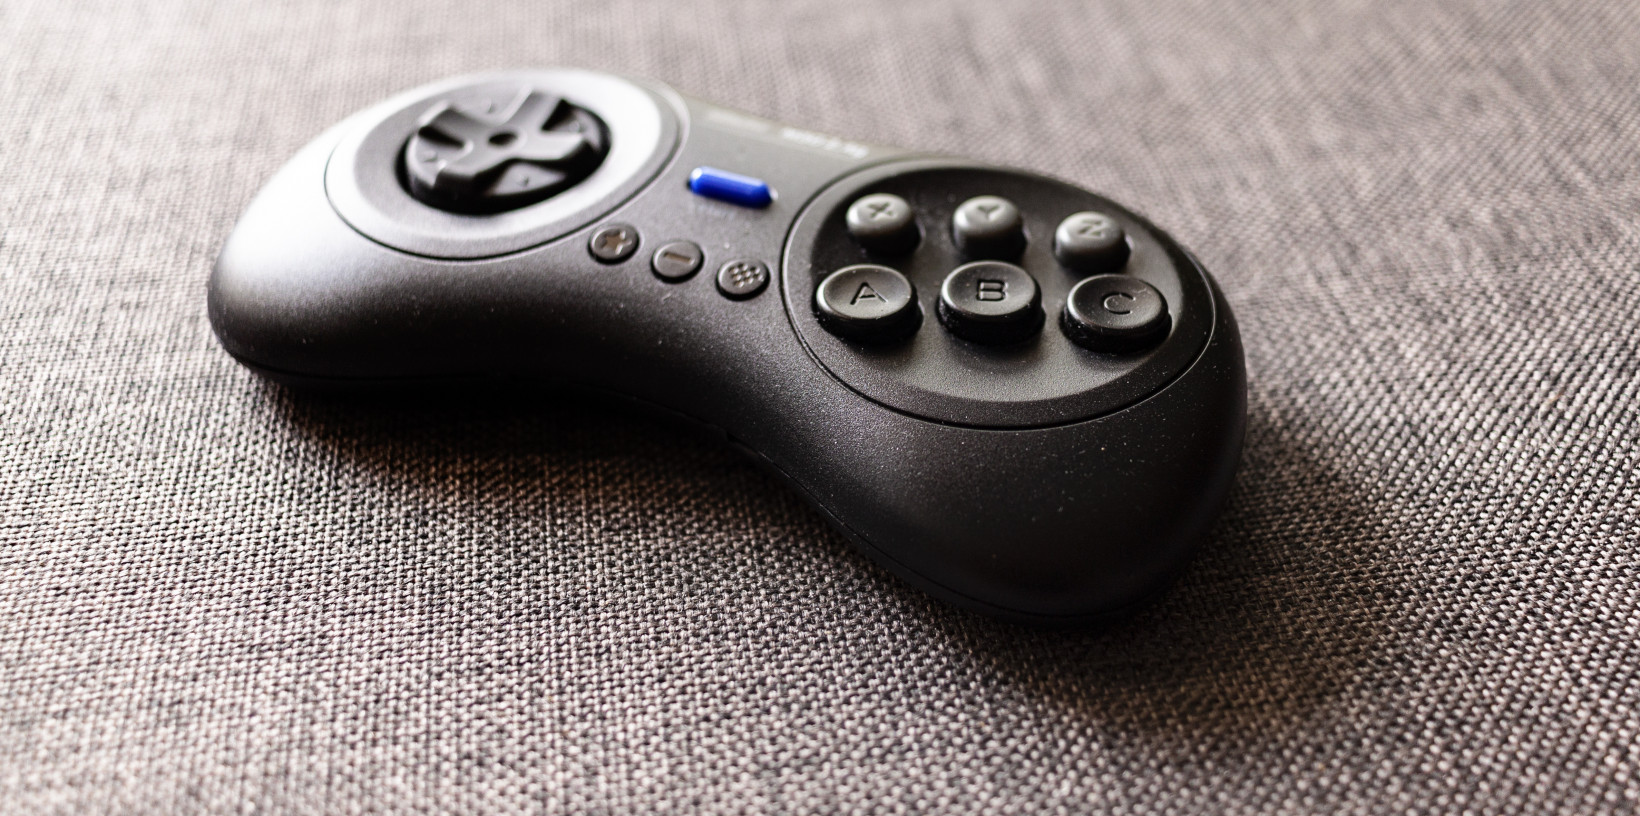 The Analogue Mega Sg is obviously the brains of the operation, but 8bitdo's fantastic controller is where the fun starts